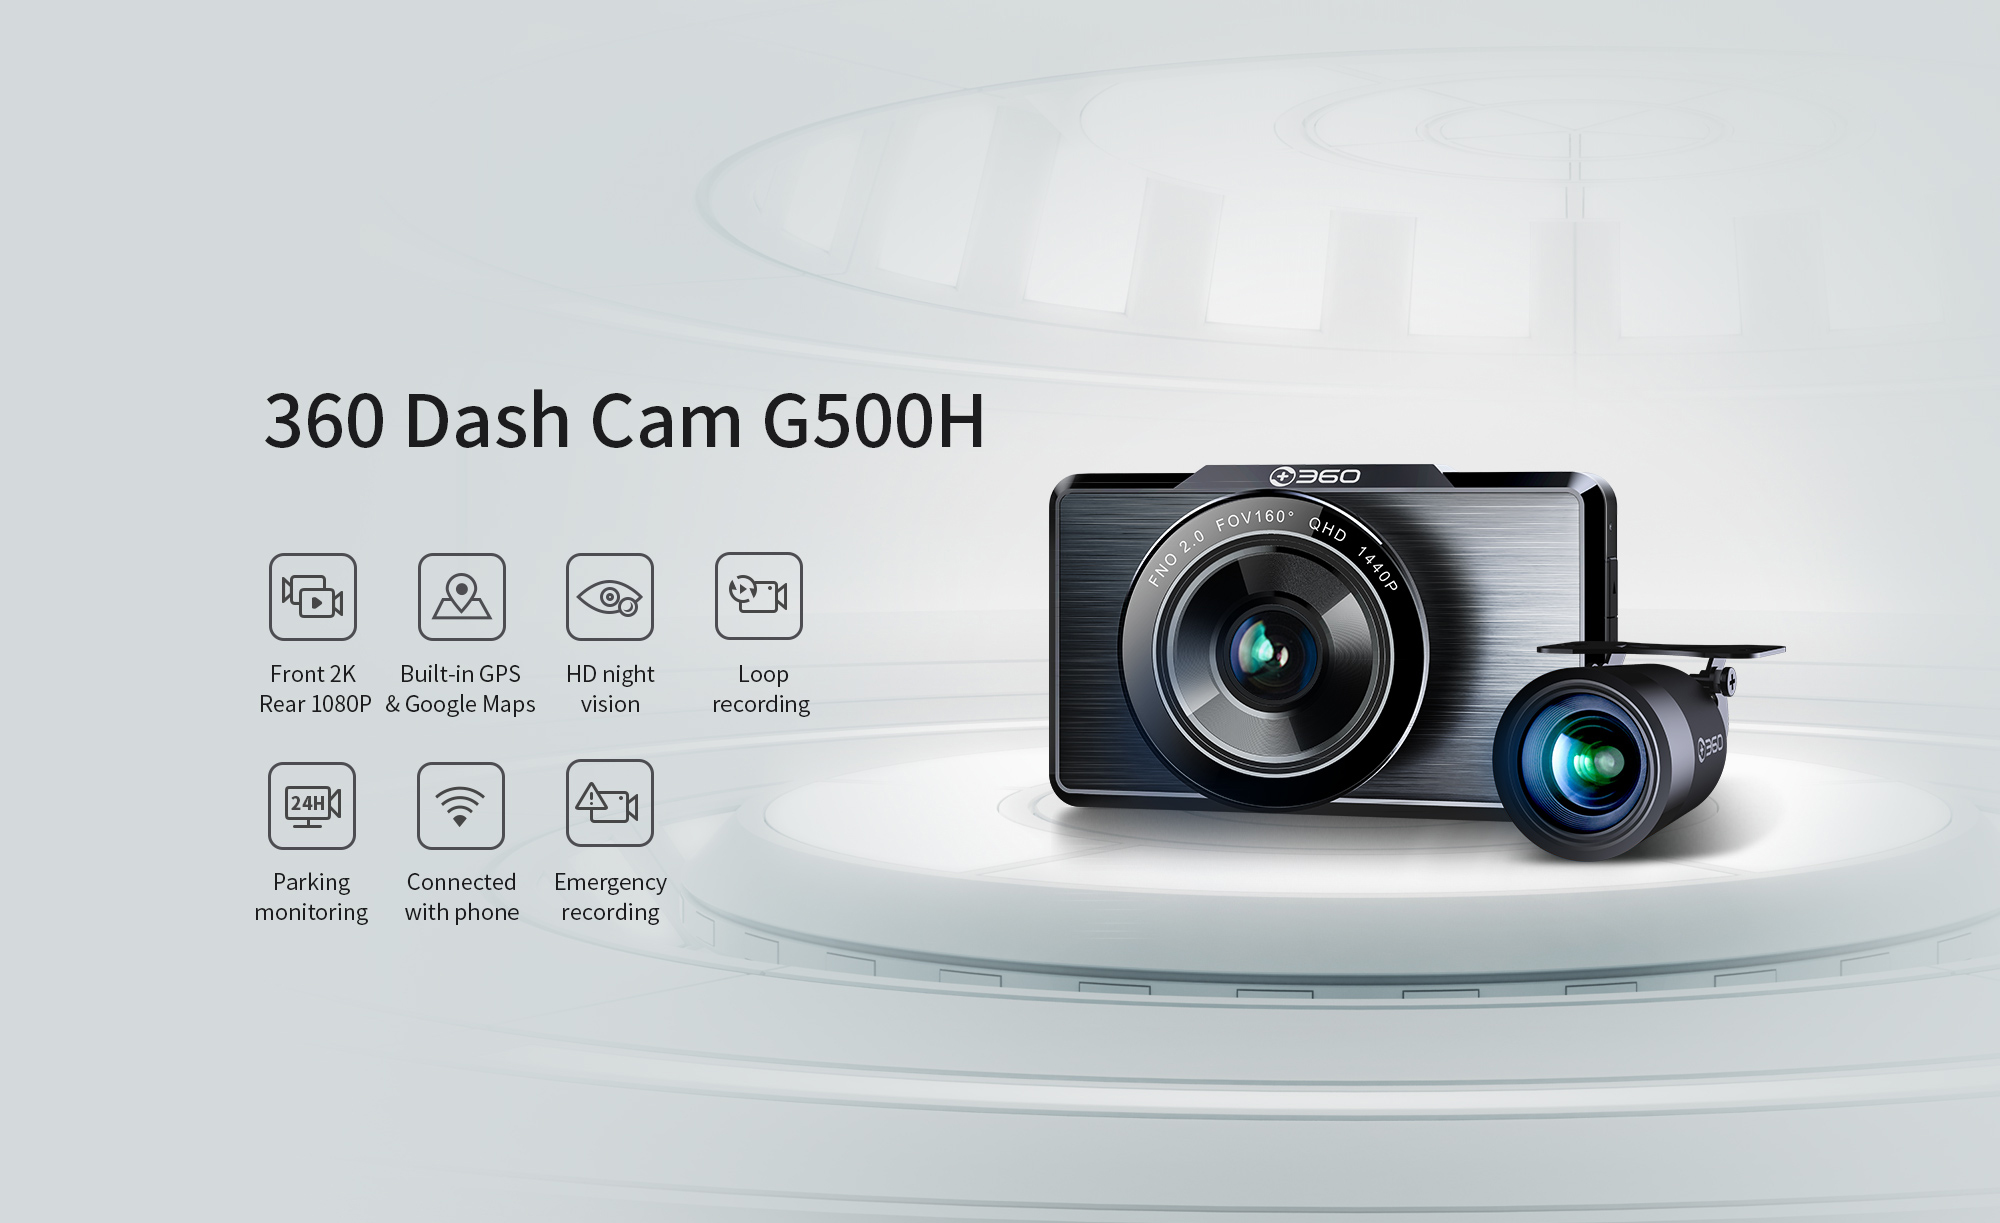 360 G500H Dash Cam Front and Rear,160° Wide Angle, Color Night Vision,  Premium Front 2K FHD Rear 1080P Dual Camera, 24hr Motion Detection Parking